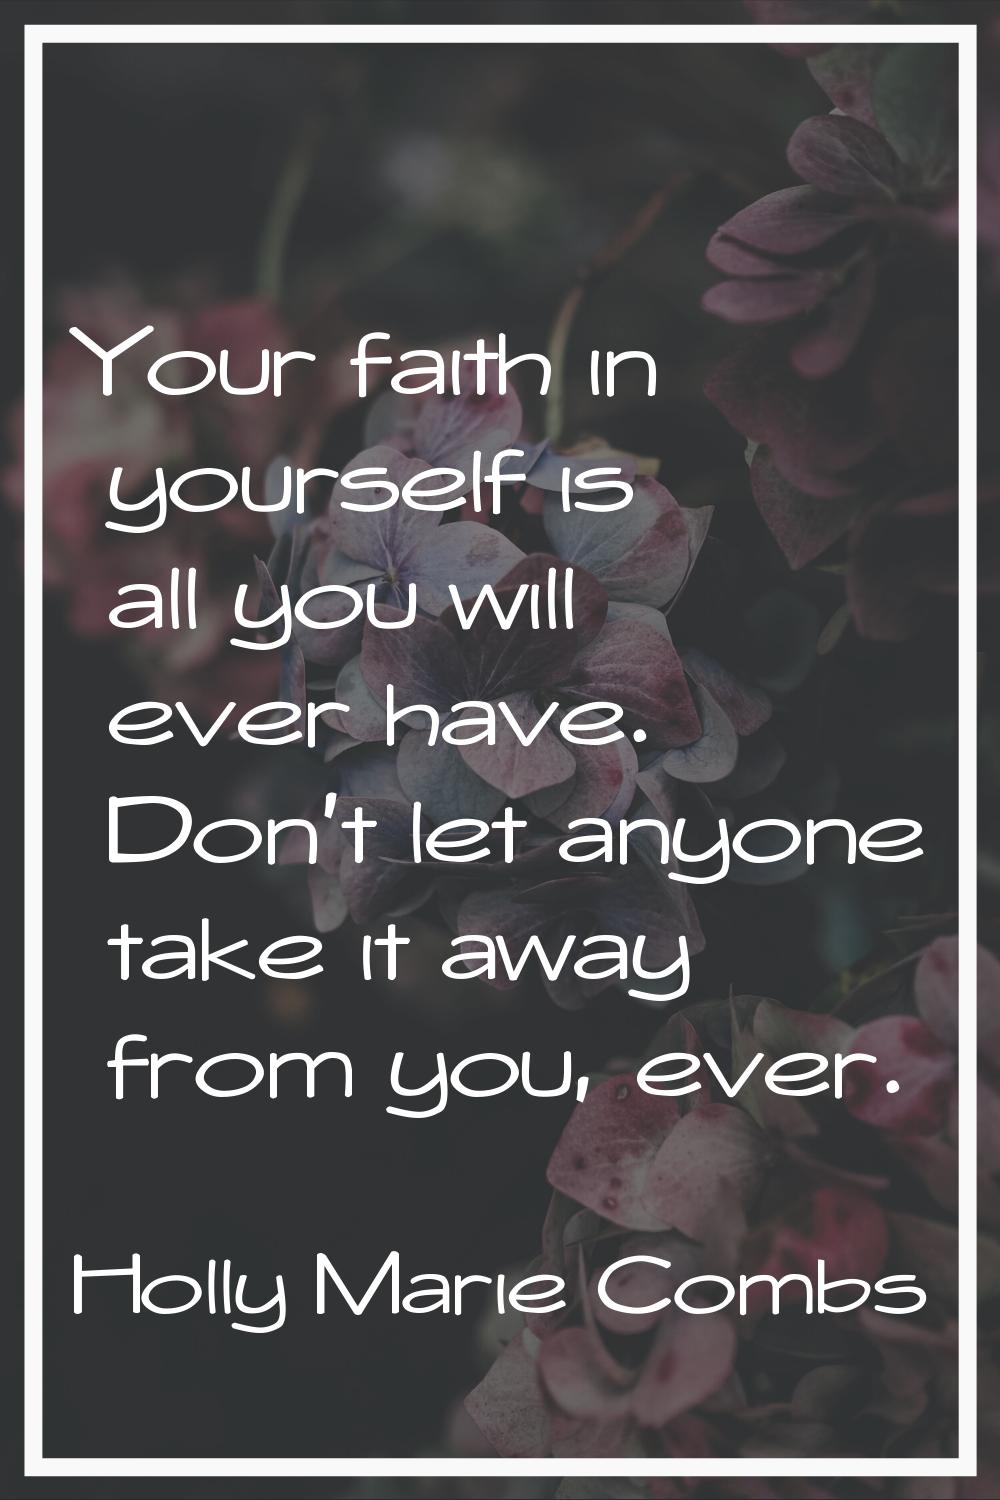 Your faith in yourself is all you will ever have. Don't let anyone take it away from you, ever.